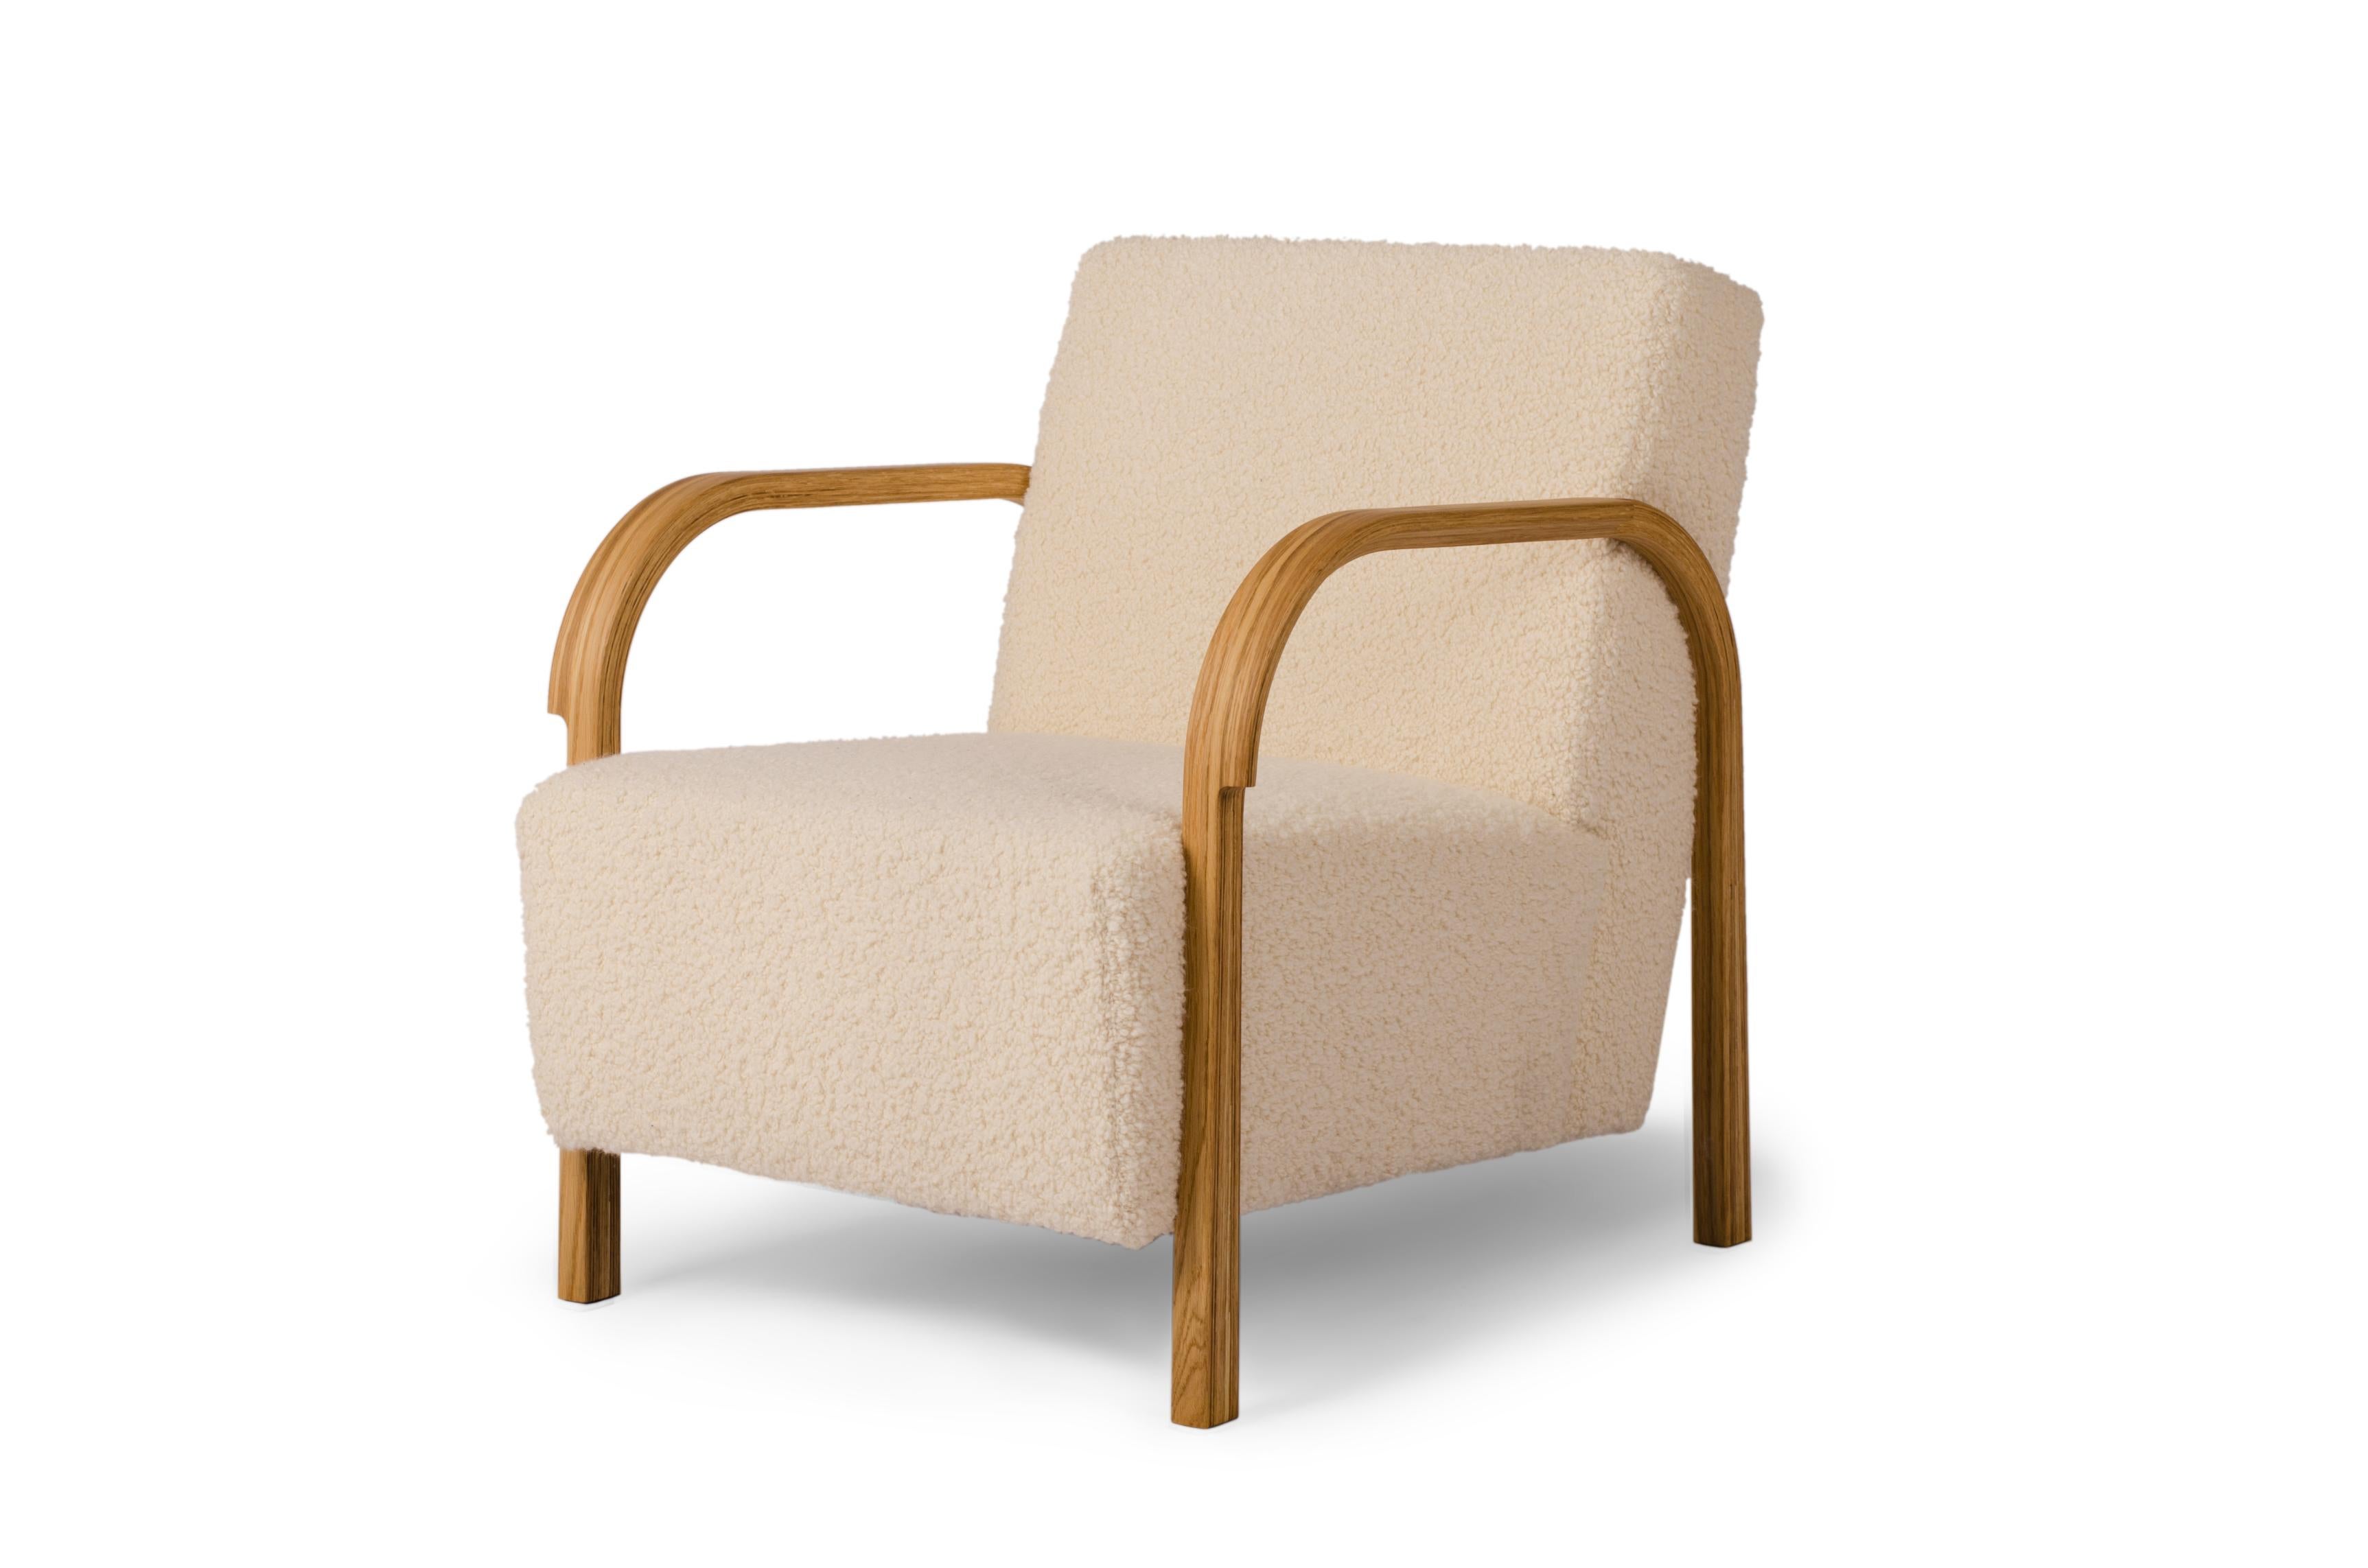 Dedar/Artemidor Arch lounge chair by Mazo Design
Dimensions: W 69 x D 79 x H 76 cm
Materials: Oak, Sheepskin

With the new ARCH collection, mazo forges new paths with their forward-looking modernism. The series is a tribute to the renowned